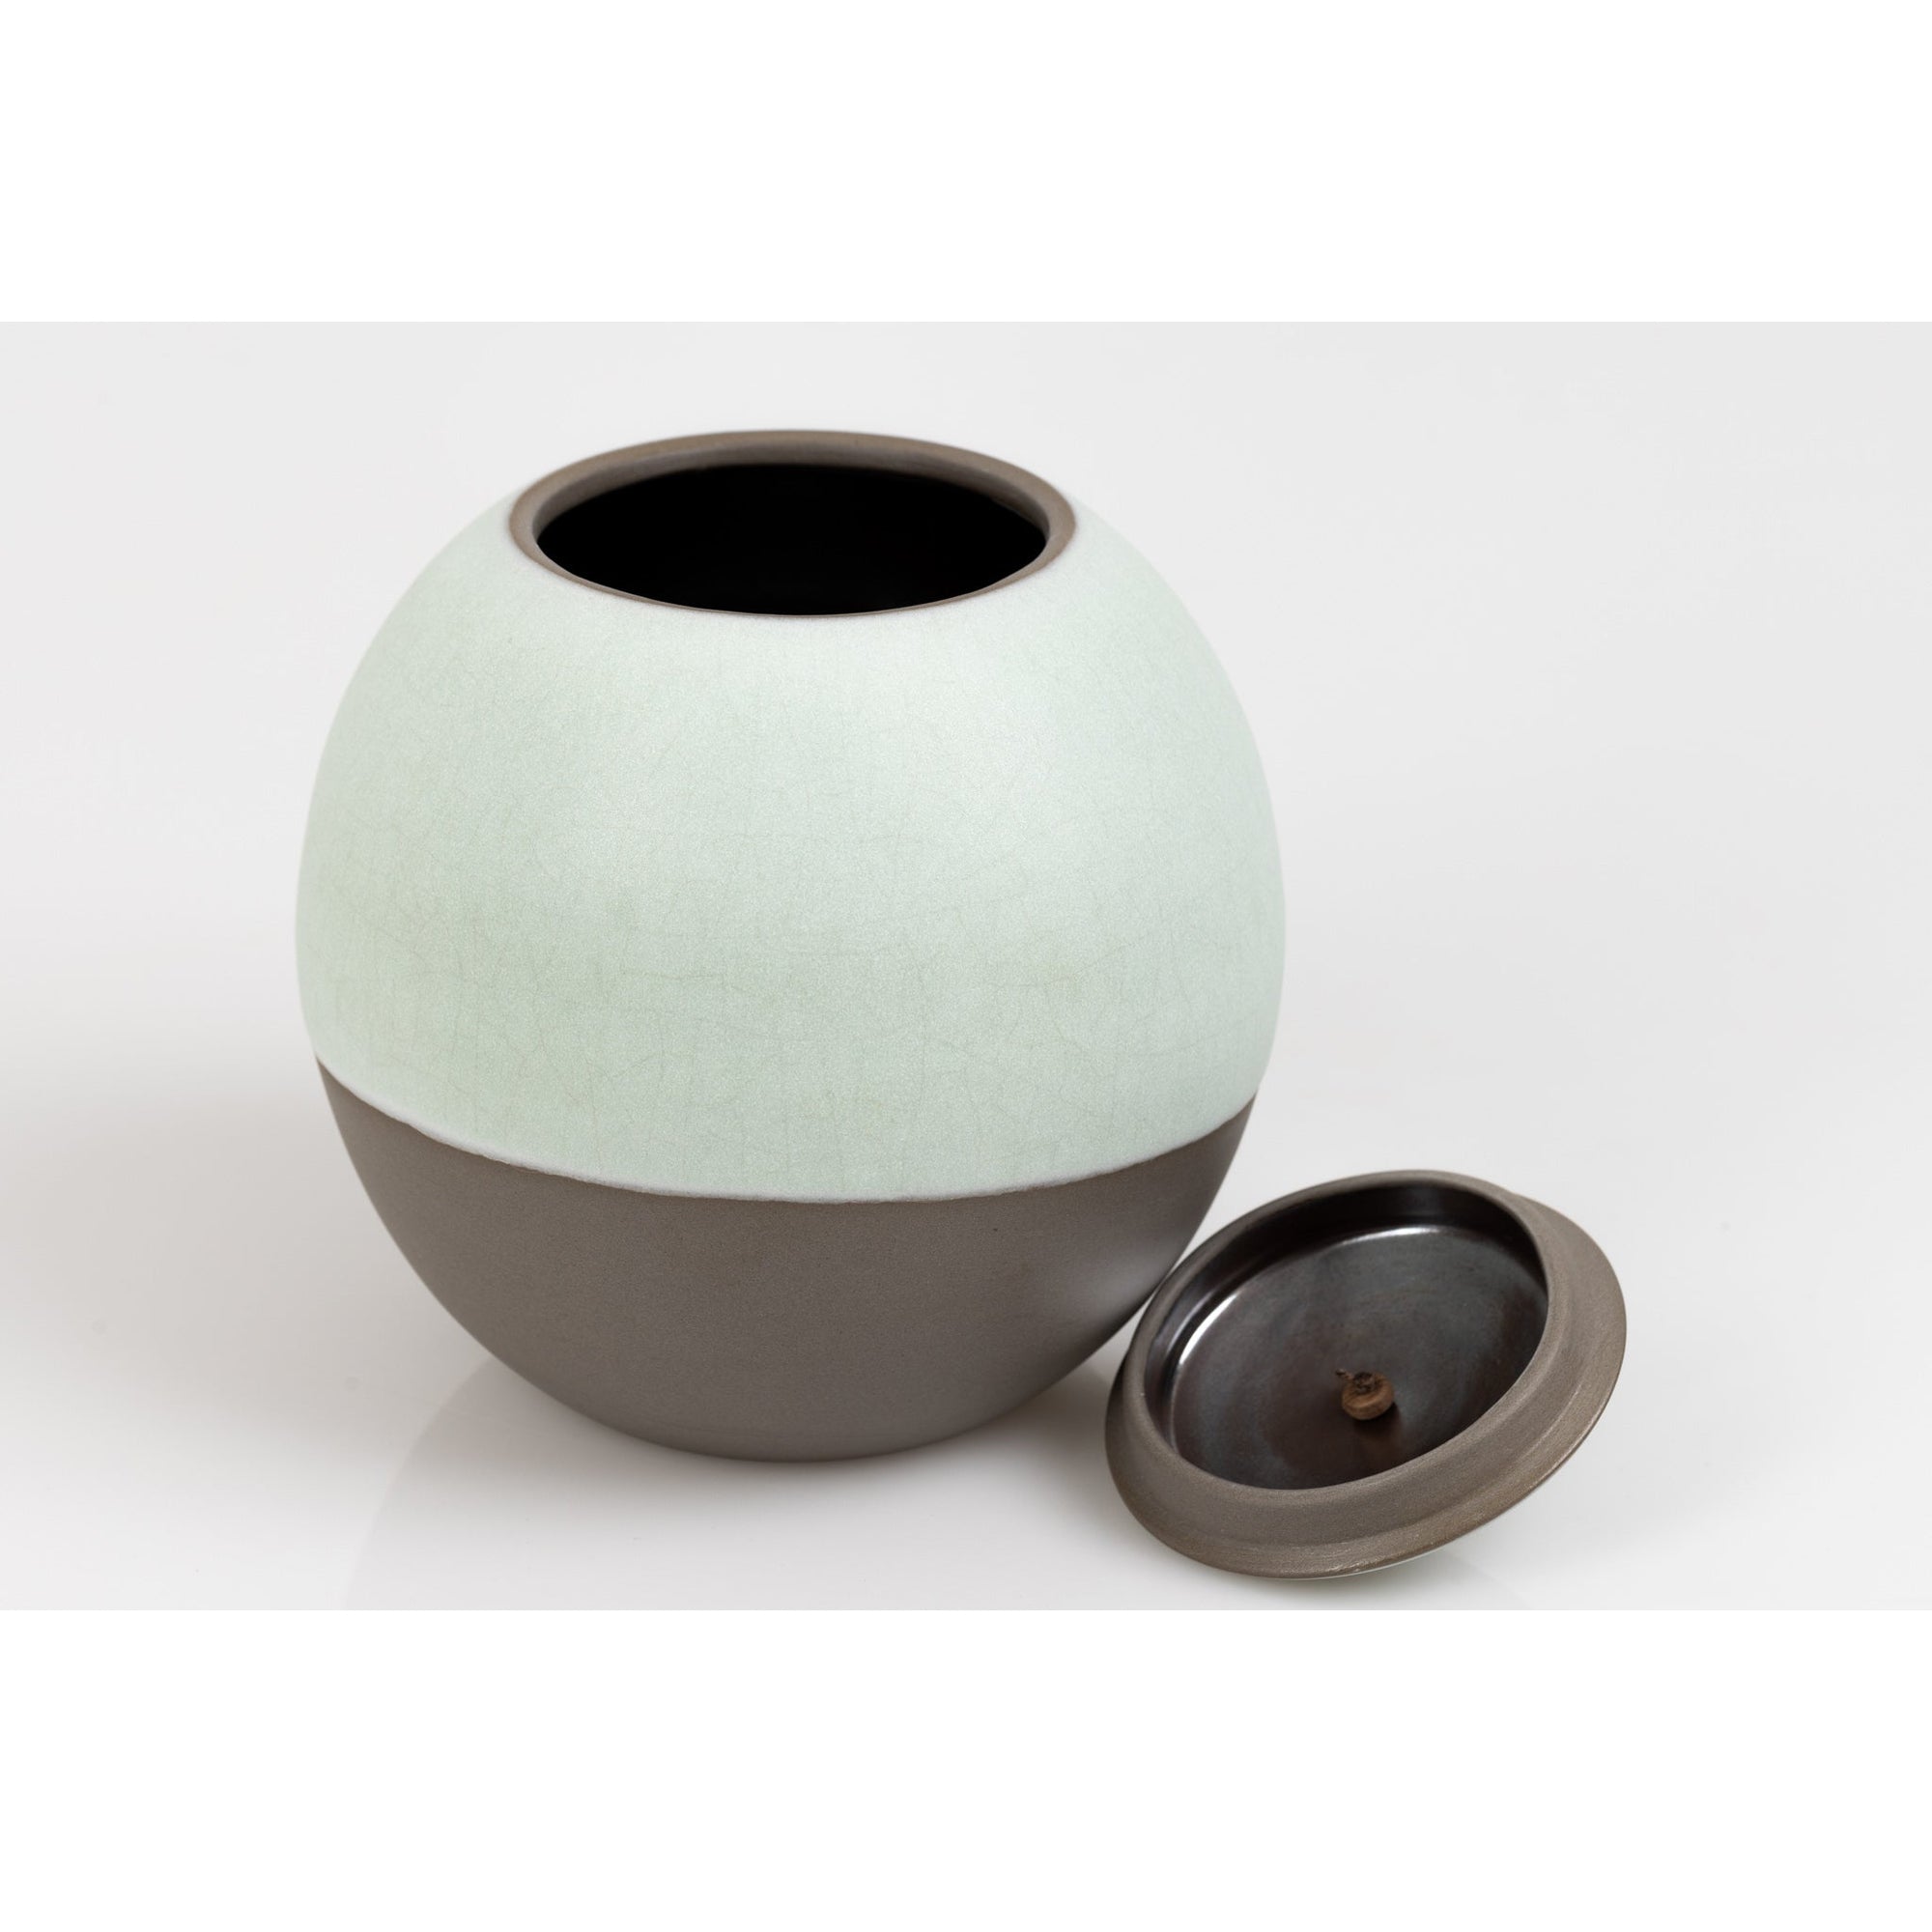 KSF1 Lunar, Stoneware Sphere Pot by Kate Schuricht, available at Padstow Gallery, Cornwall